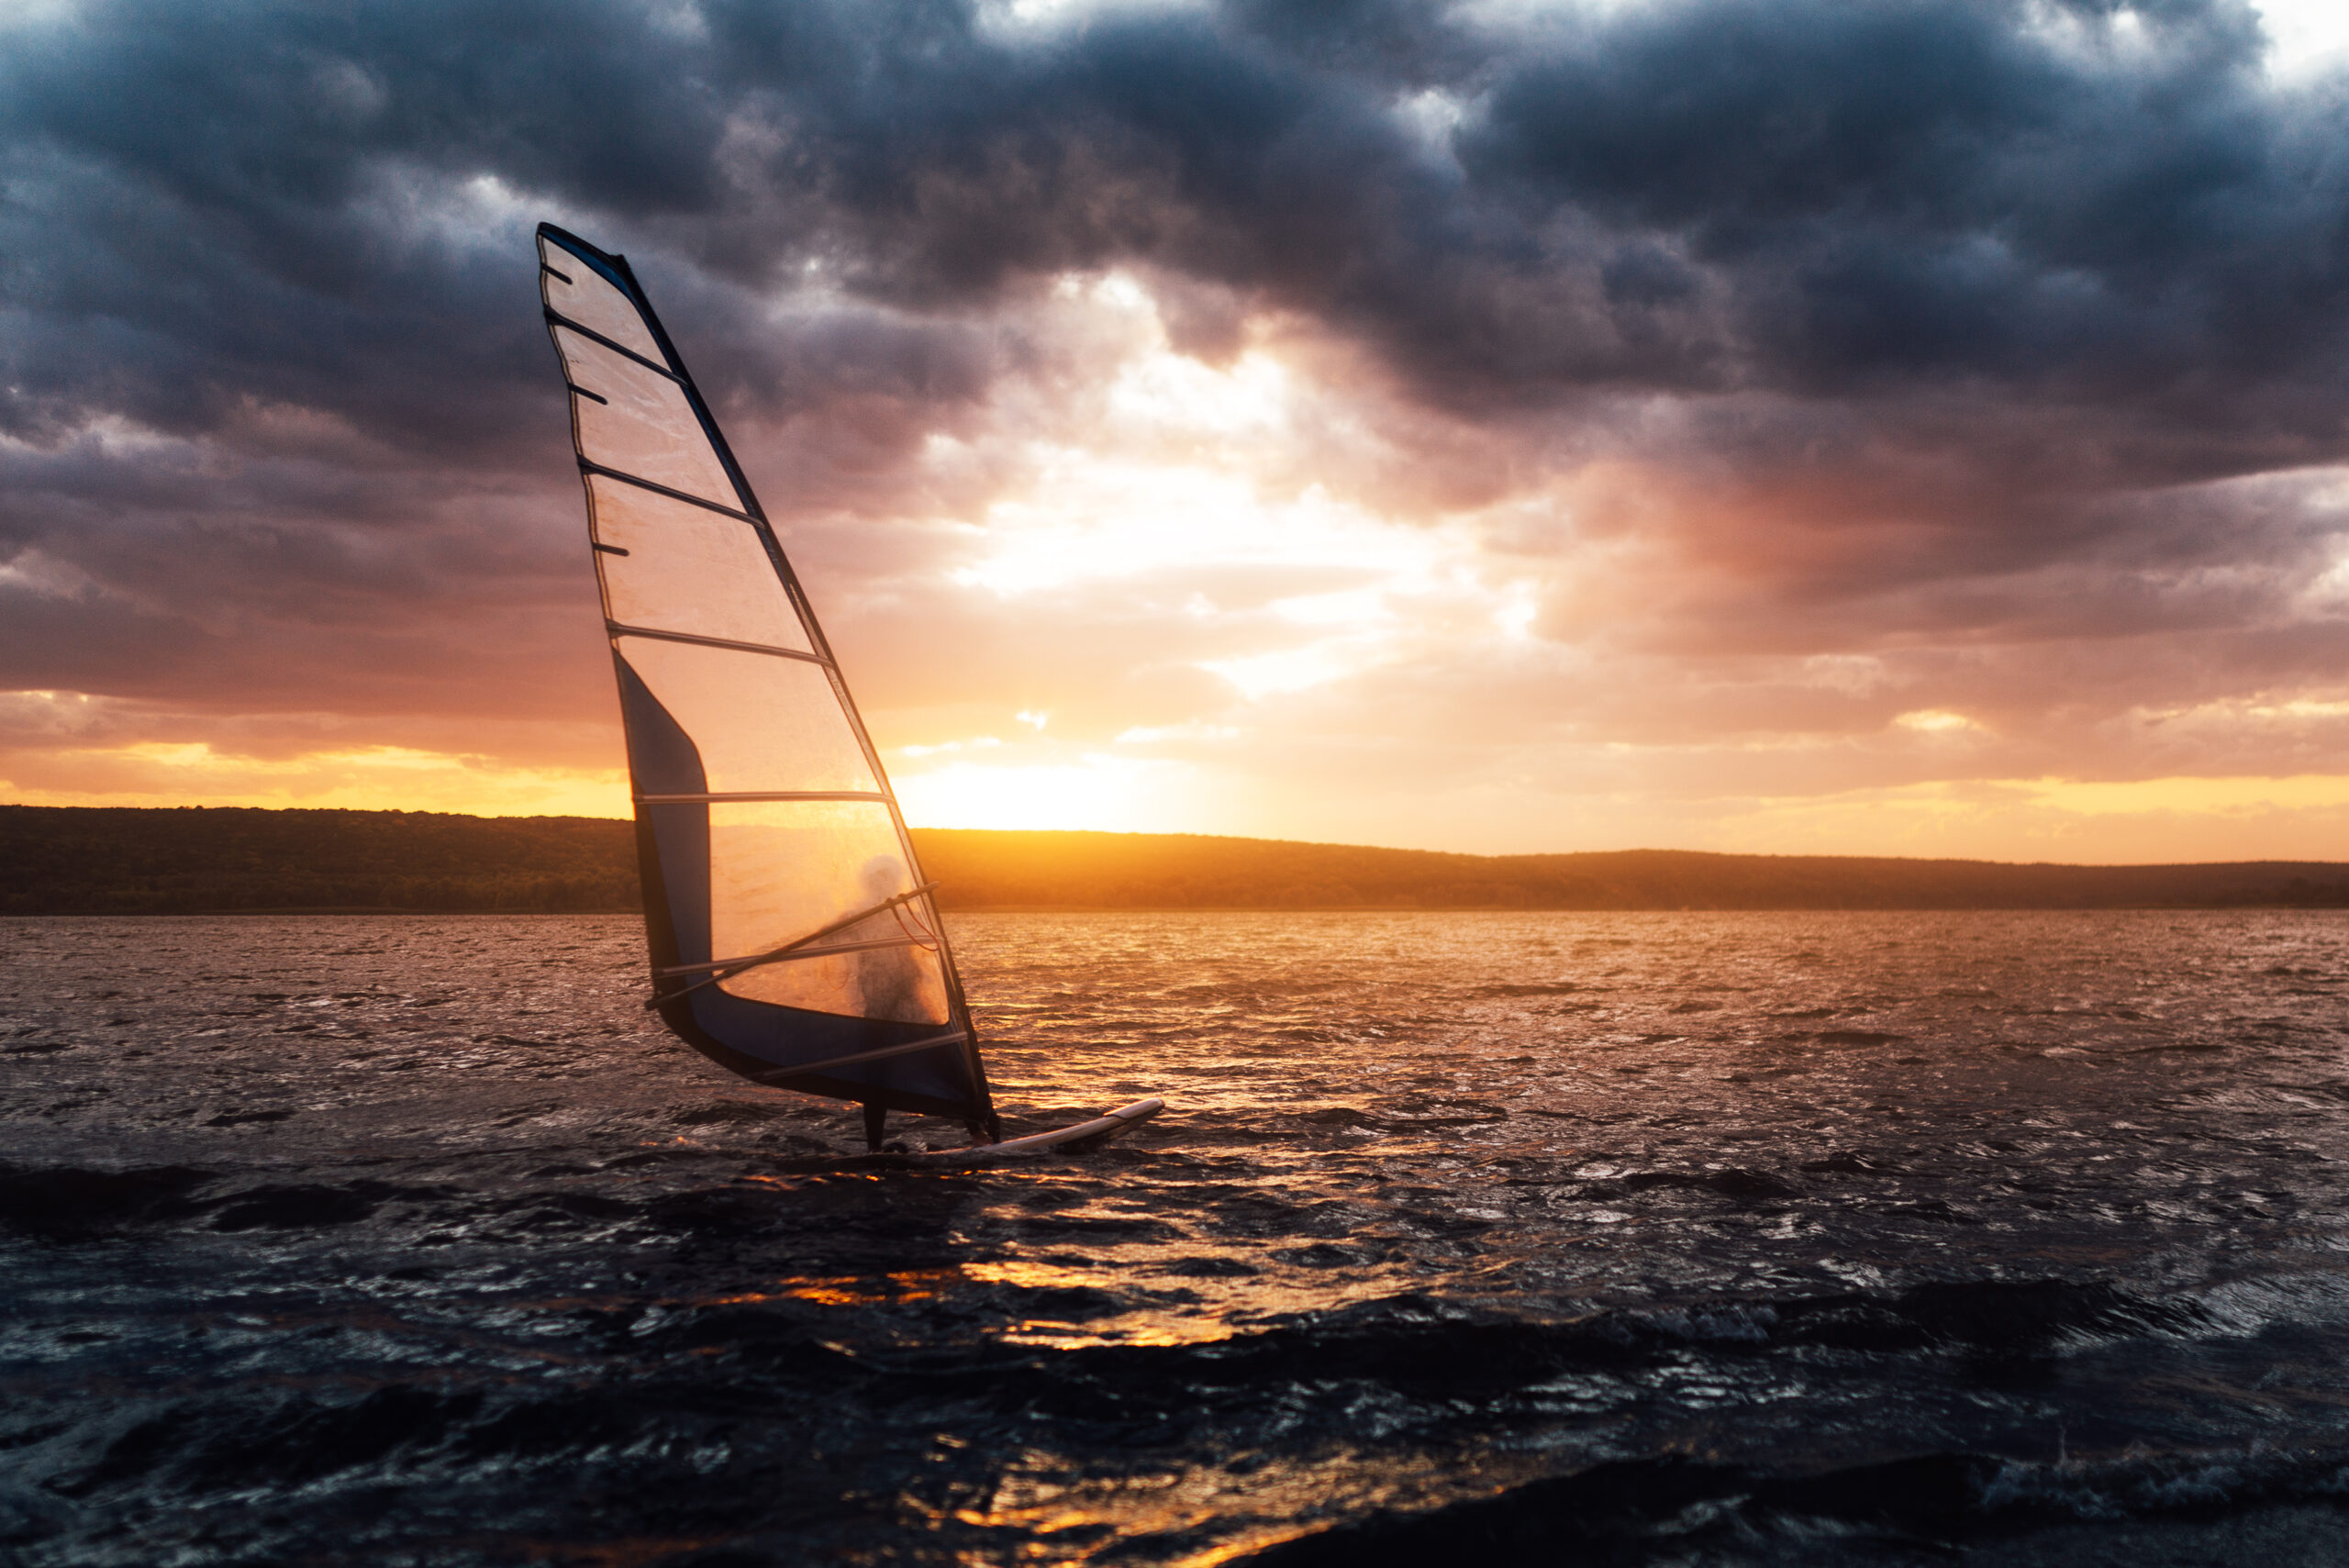 Windsurfing on a lake at sunset, contrast scene.